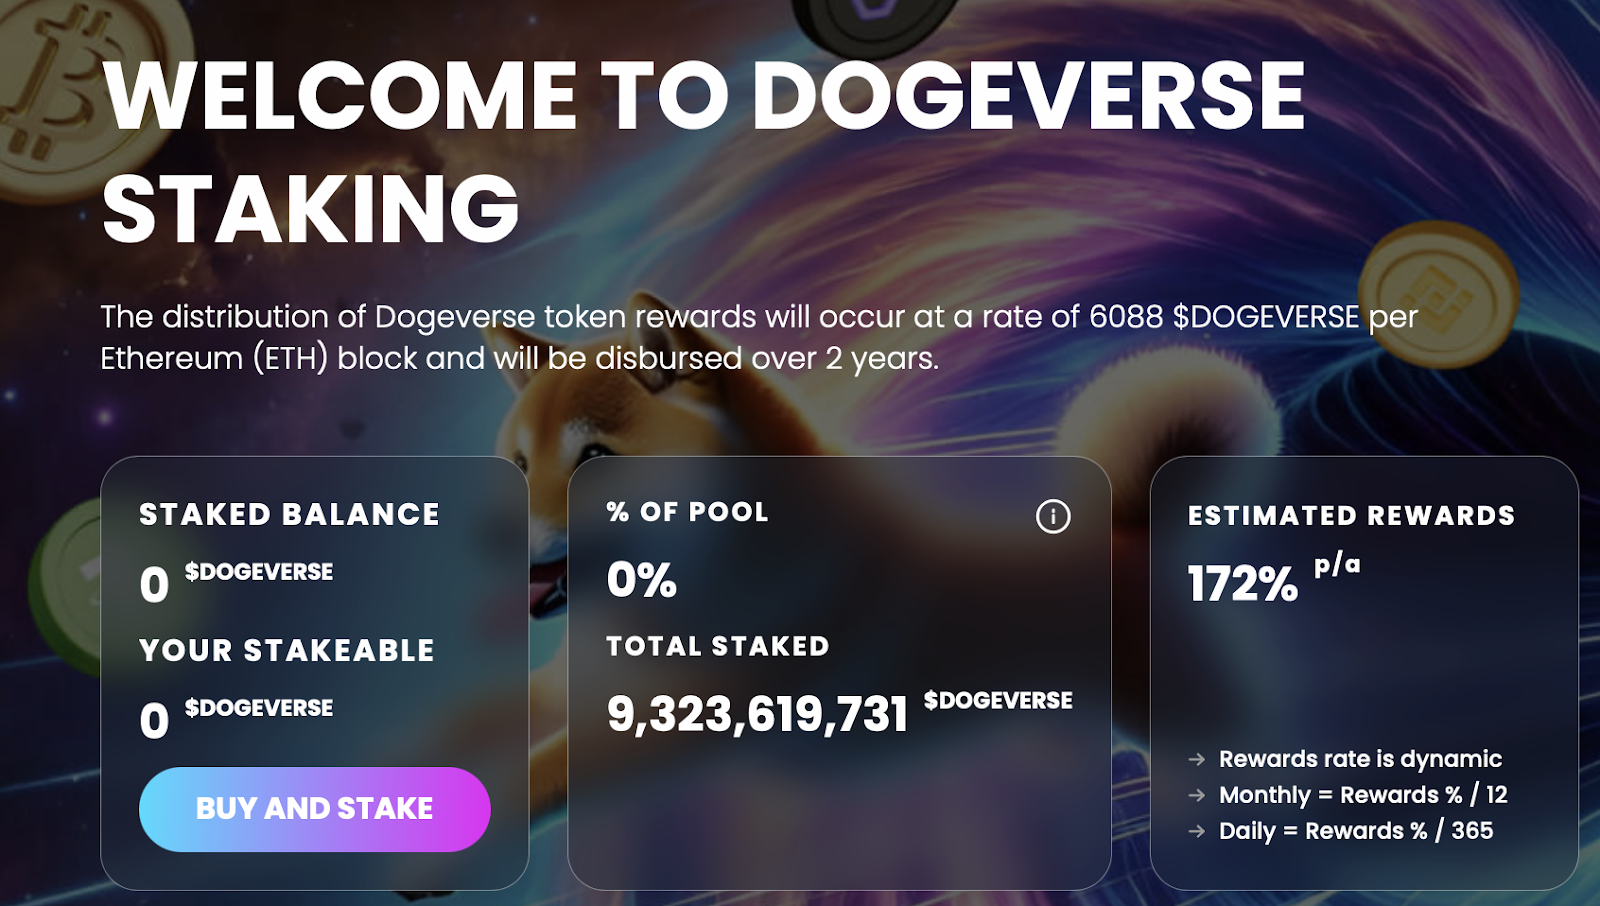 Dogeverse Staking